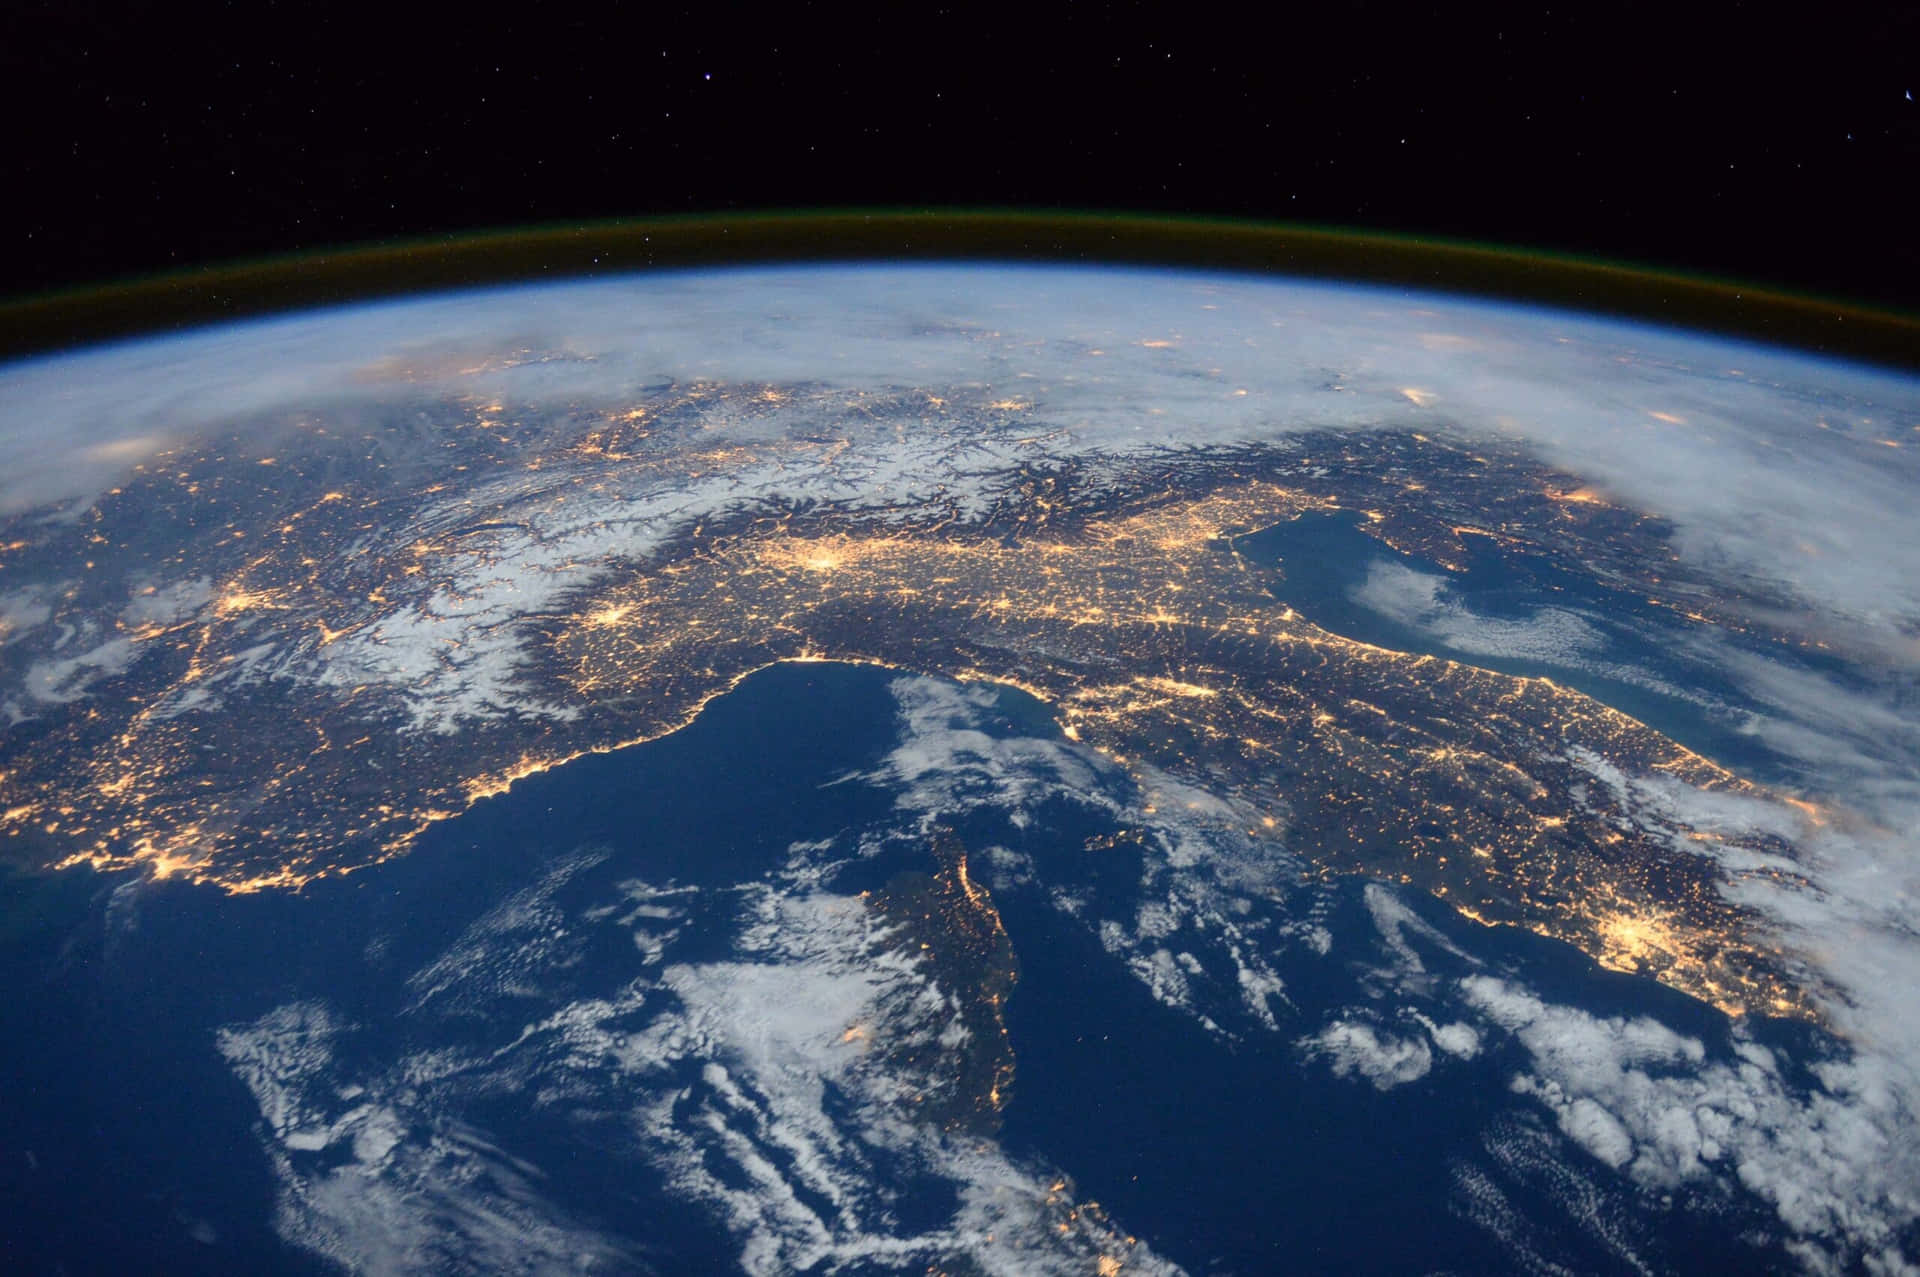 A stunning view of our incredible planet Wallpaper